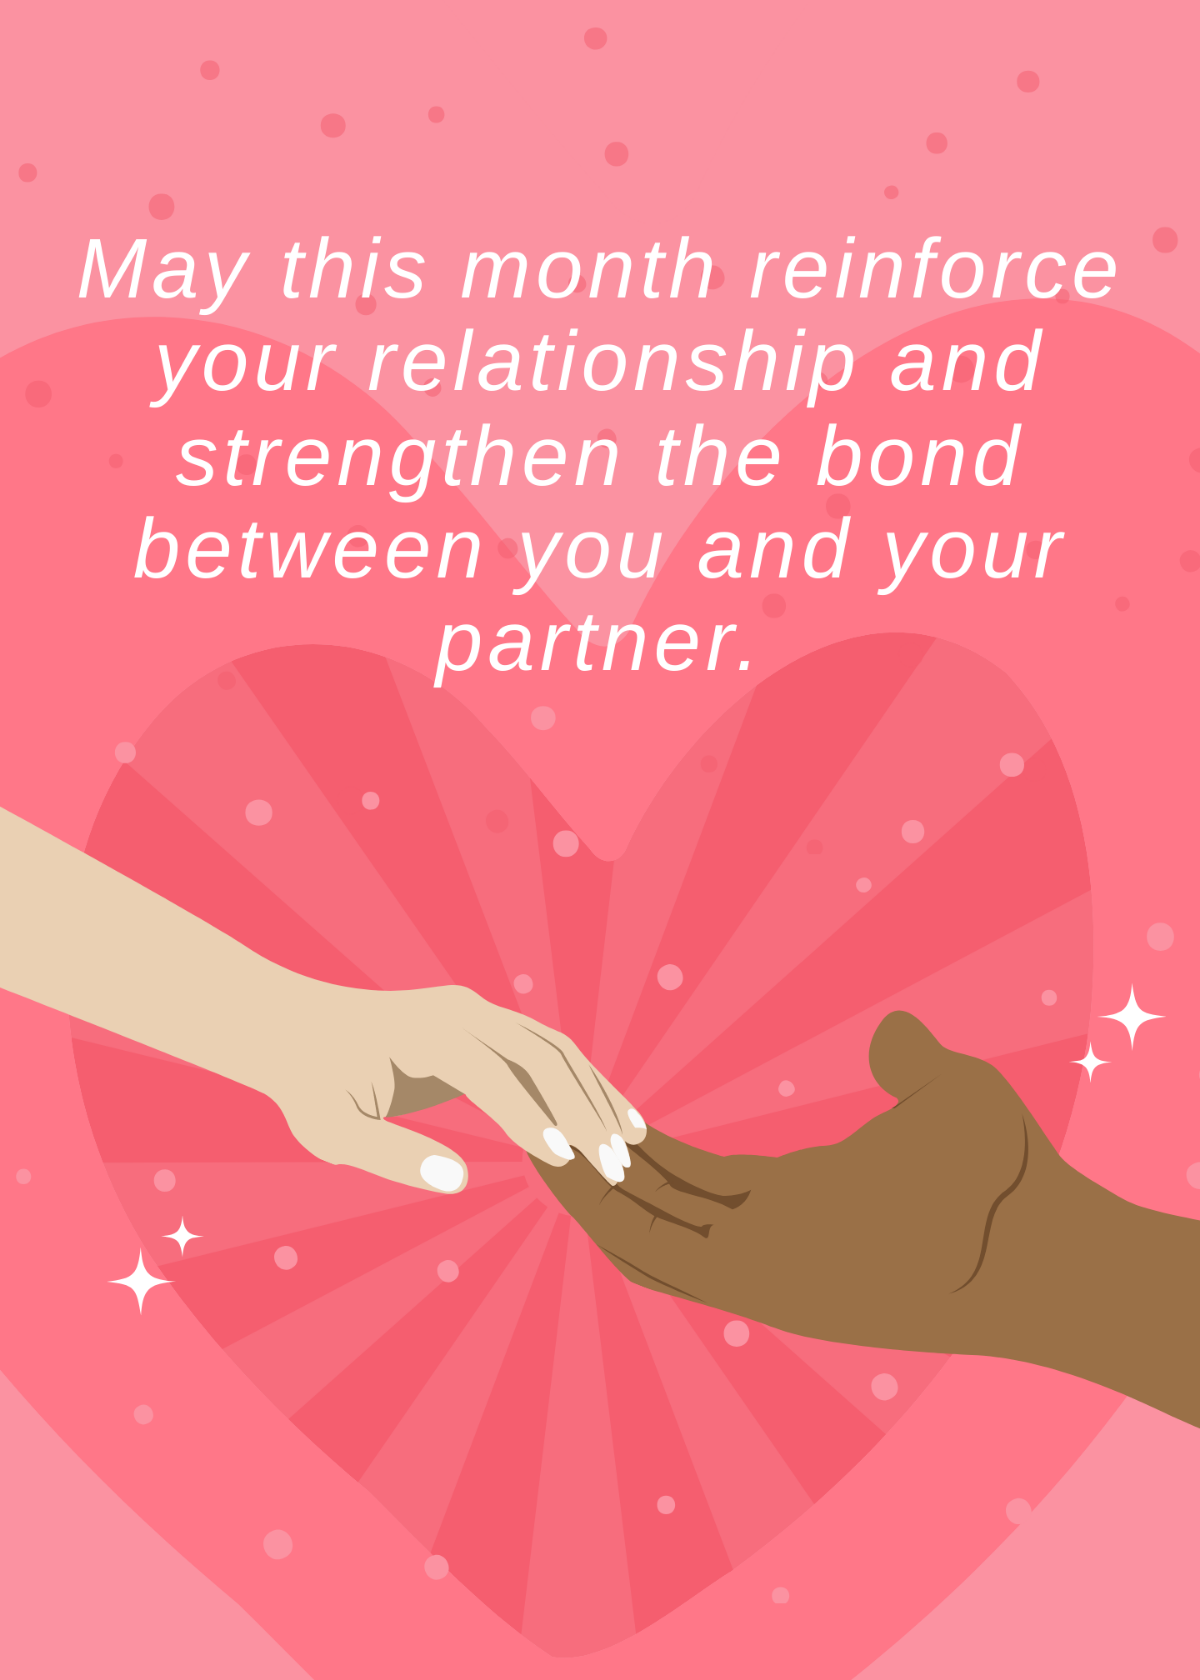 Couple Appreciation Month Greeting Card Template